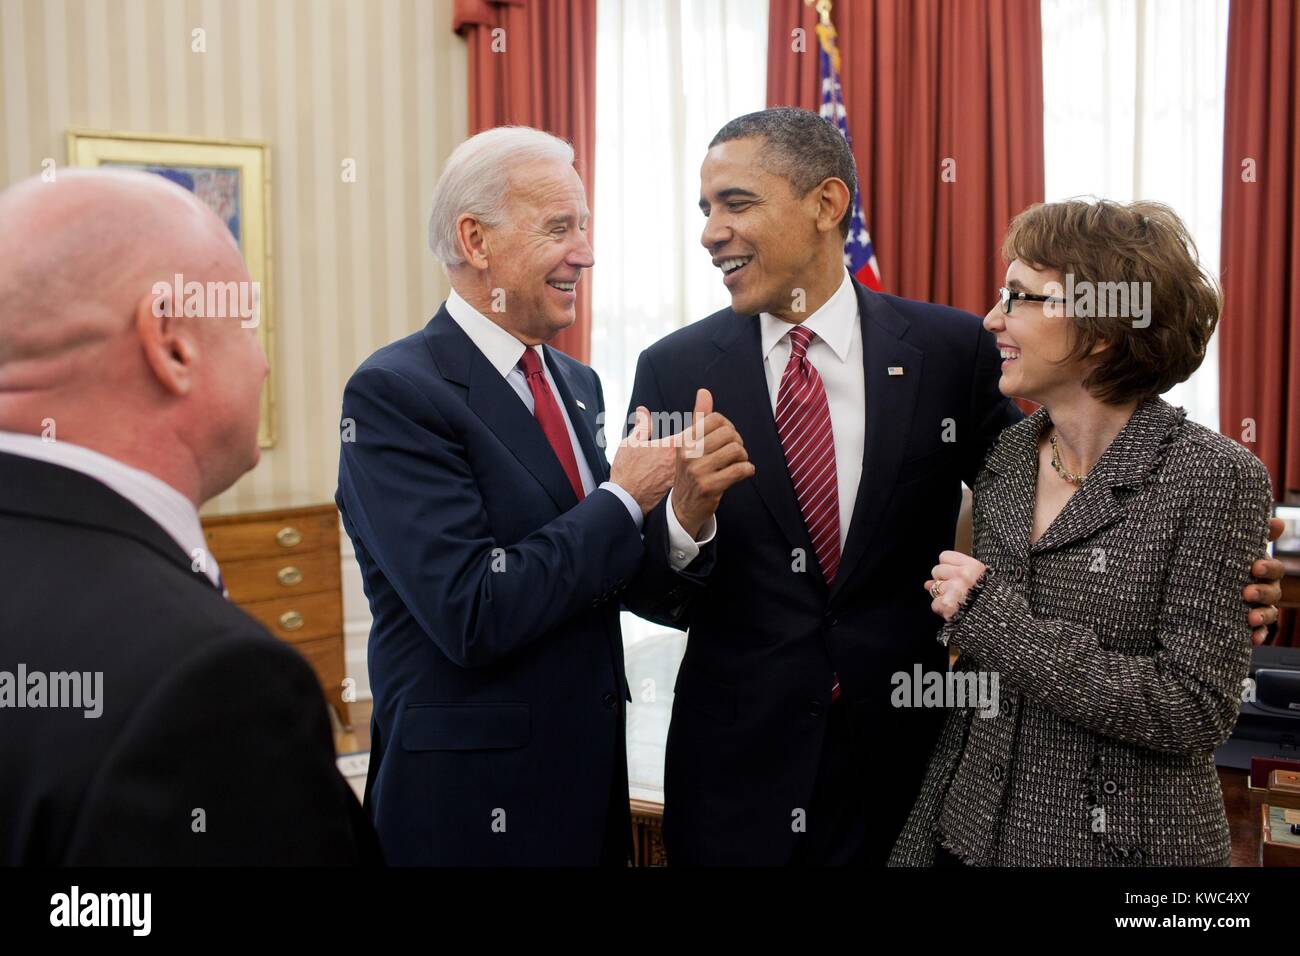 Pres. Obama and VP Biden with former Rep. Gabrielle Giffords and her husband, Mark Kelly. Feb. 10, 2012. They were in the Oval Office for the signing H.R. 3801, the Ultralight Aircraft Smuggling Prevention Act of 2012, the last piece of legislation that Giffords sponsored. (BSLOC 2015 13 165) Stock Photo